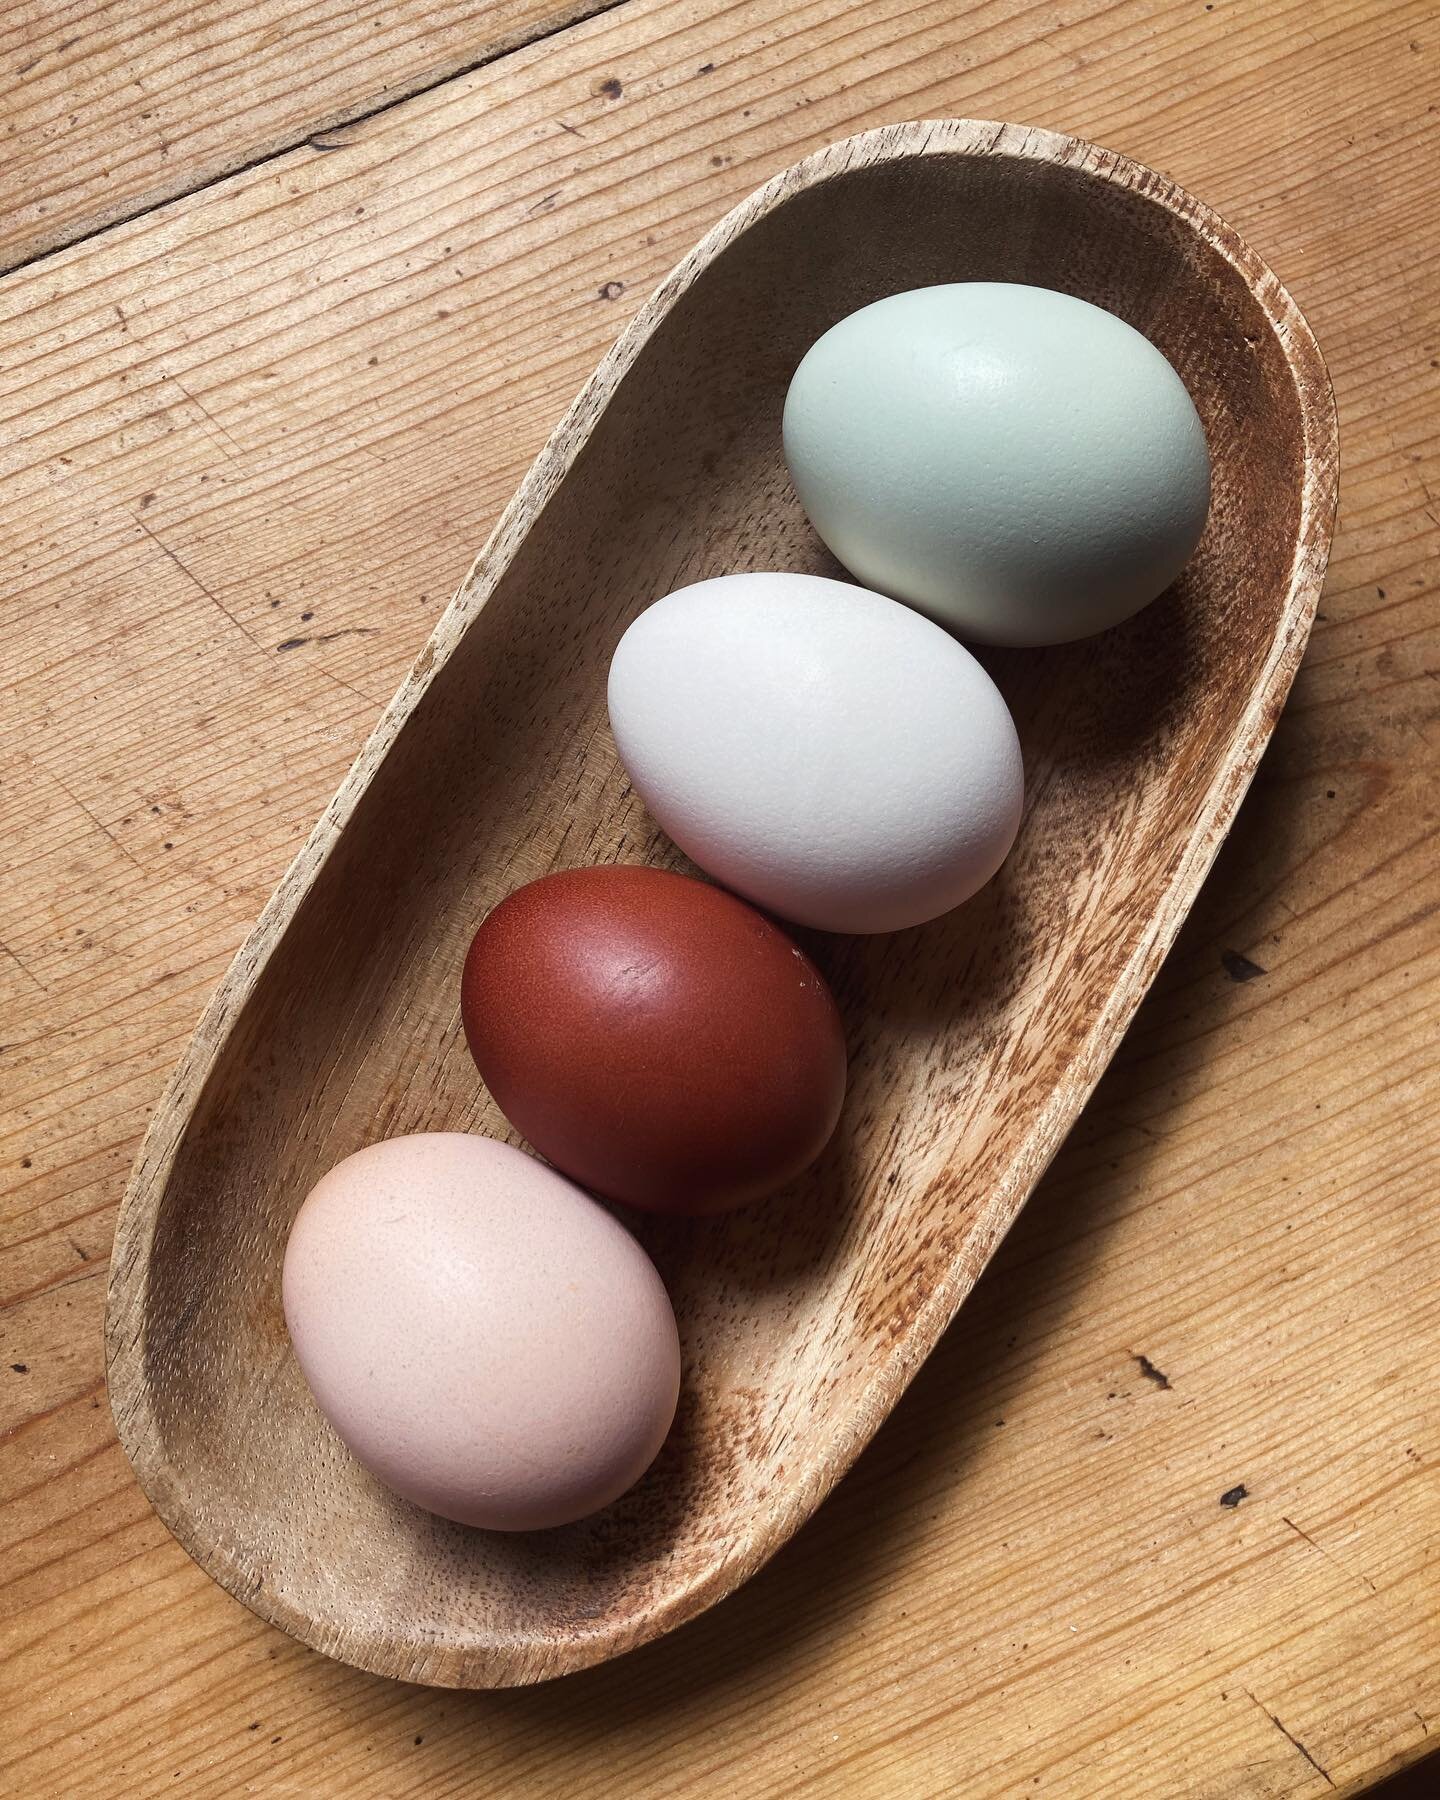 Finally got my first French copper maran egg after 7 months, and it was worth the wait for this beautiful dark chocolate color! 🐣 #coppermaran #coppermaraneggs #rainboweggs #coloredeggs #rainboweggs🌈 #easteregg #eastereggers